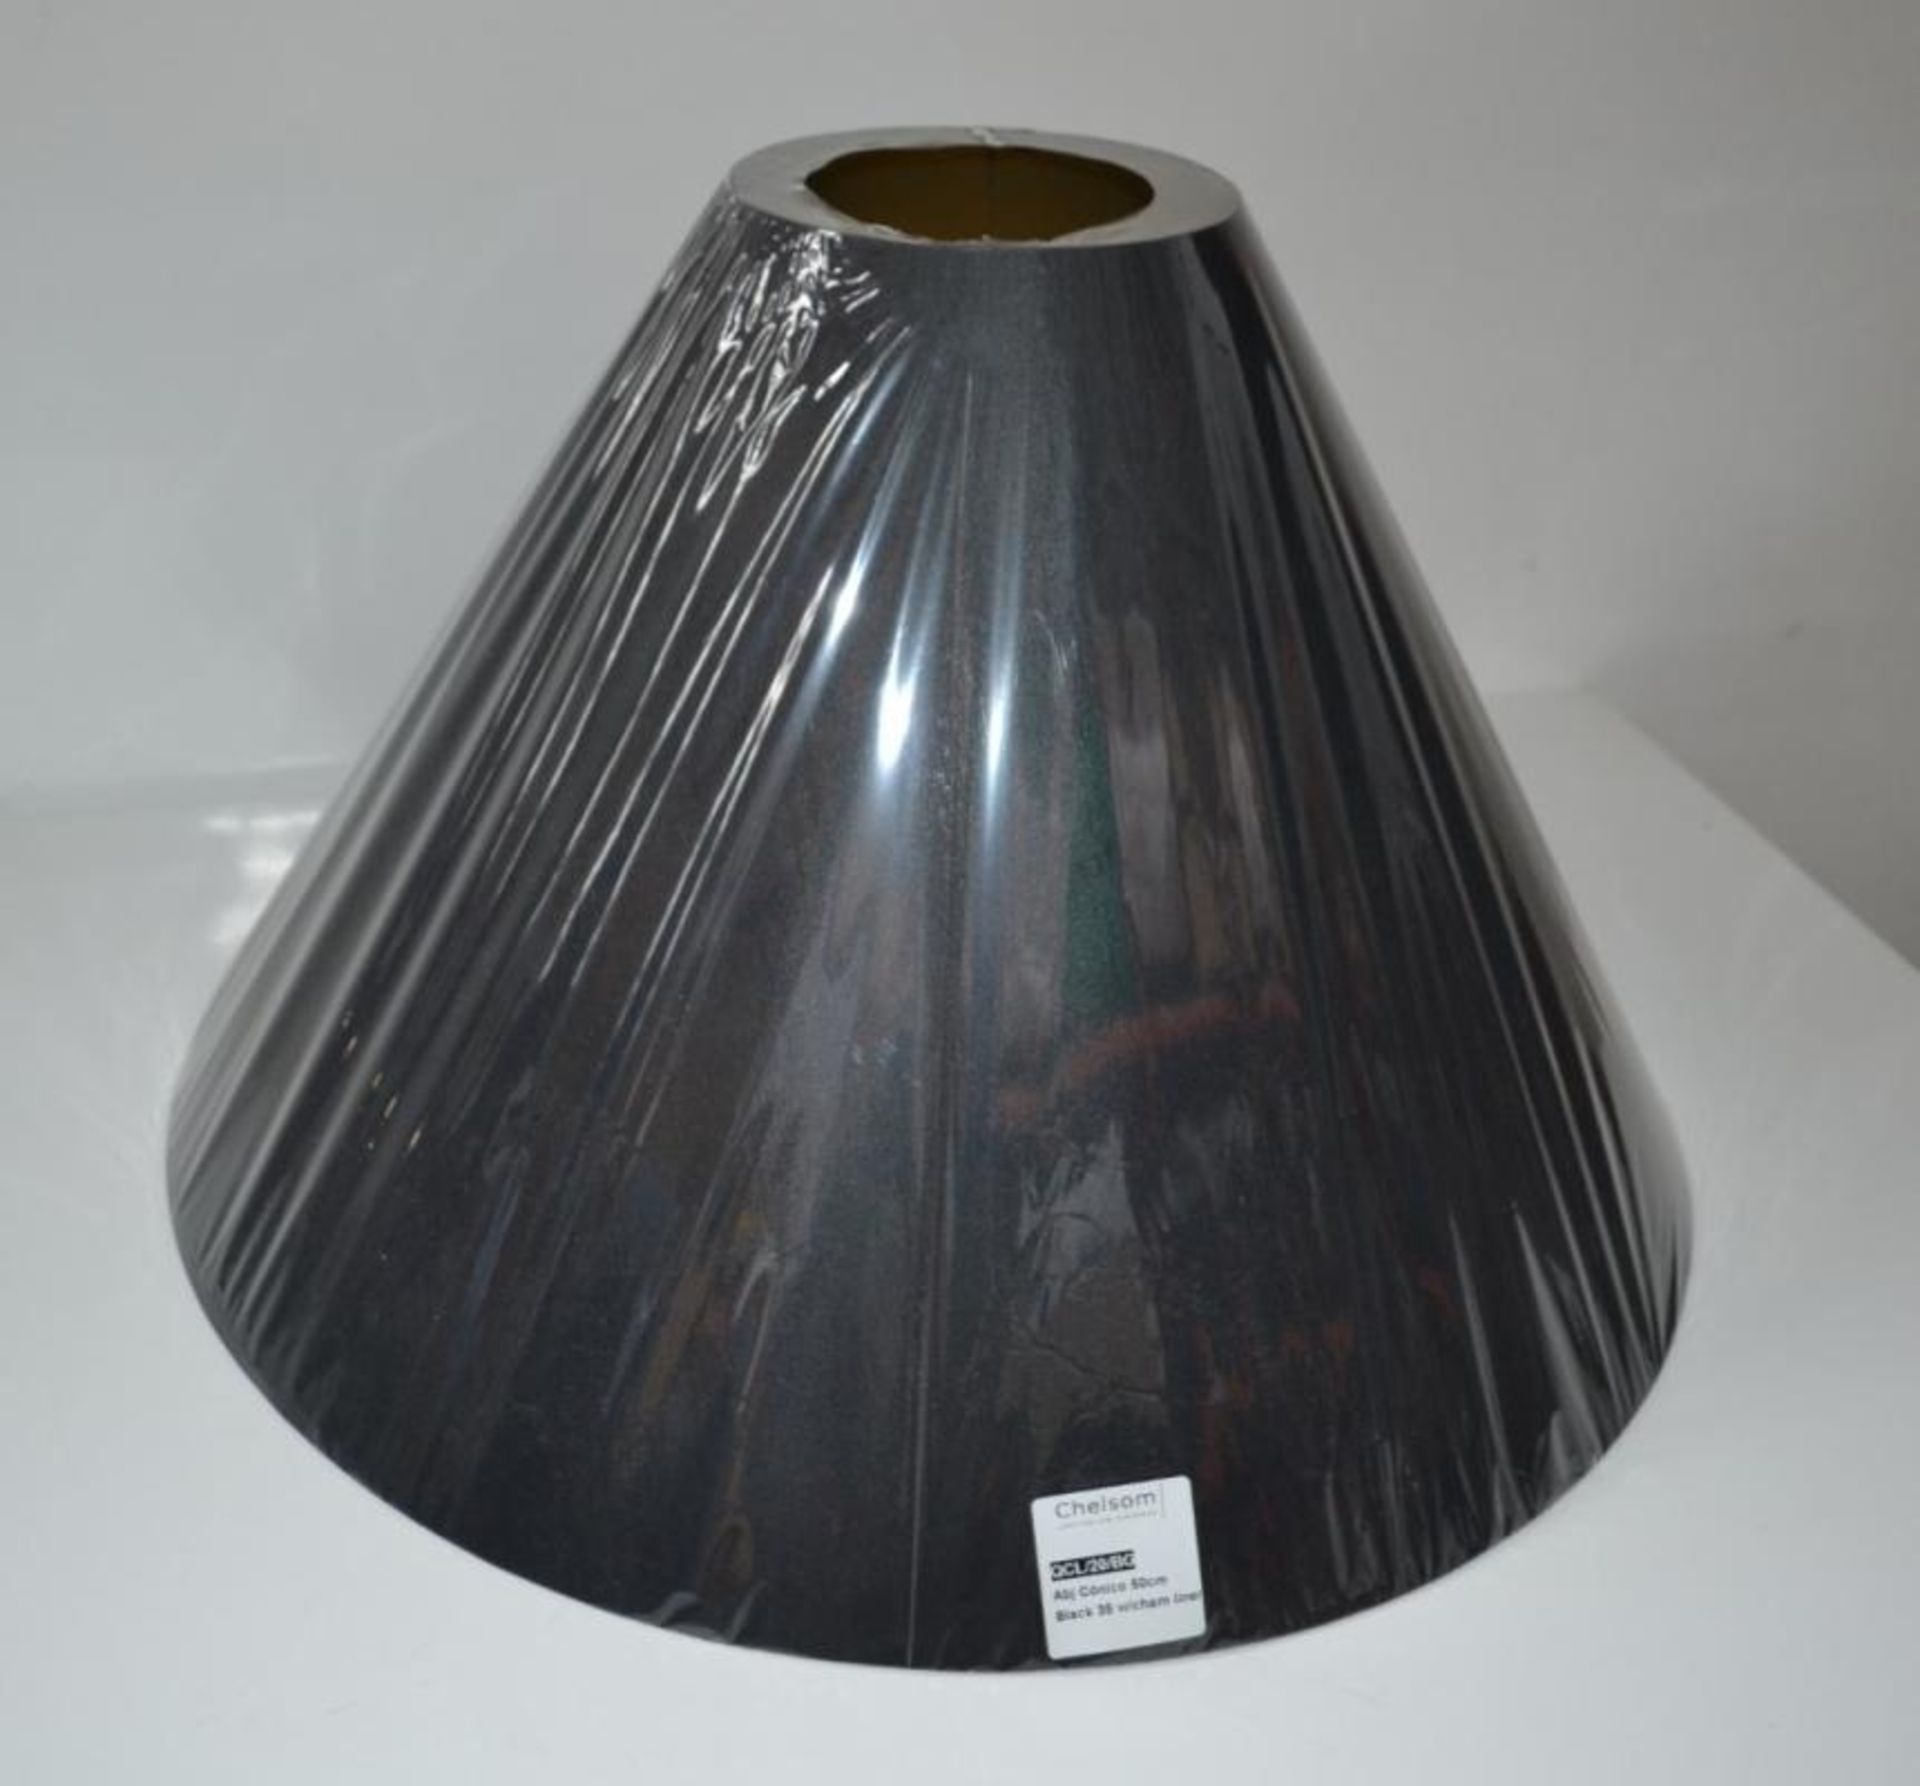 2 x Chelsom Lamp 50cm Shades In Black With Champagne Coloured Lining - New/Unused boxed stock - CL00